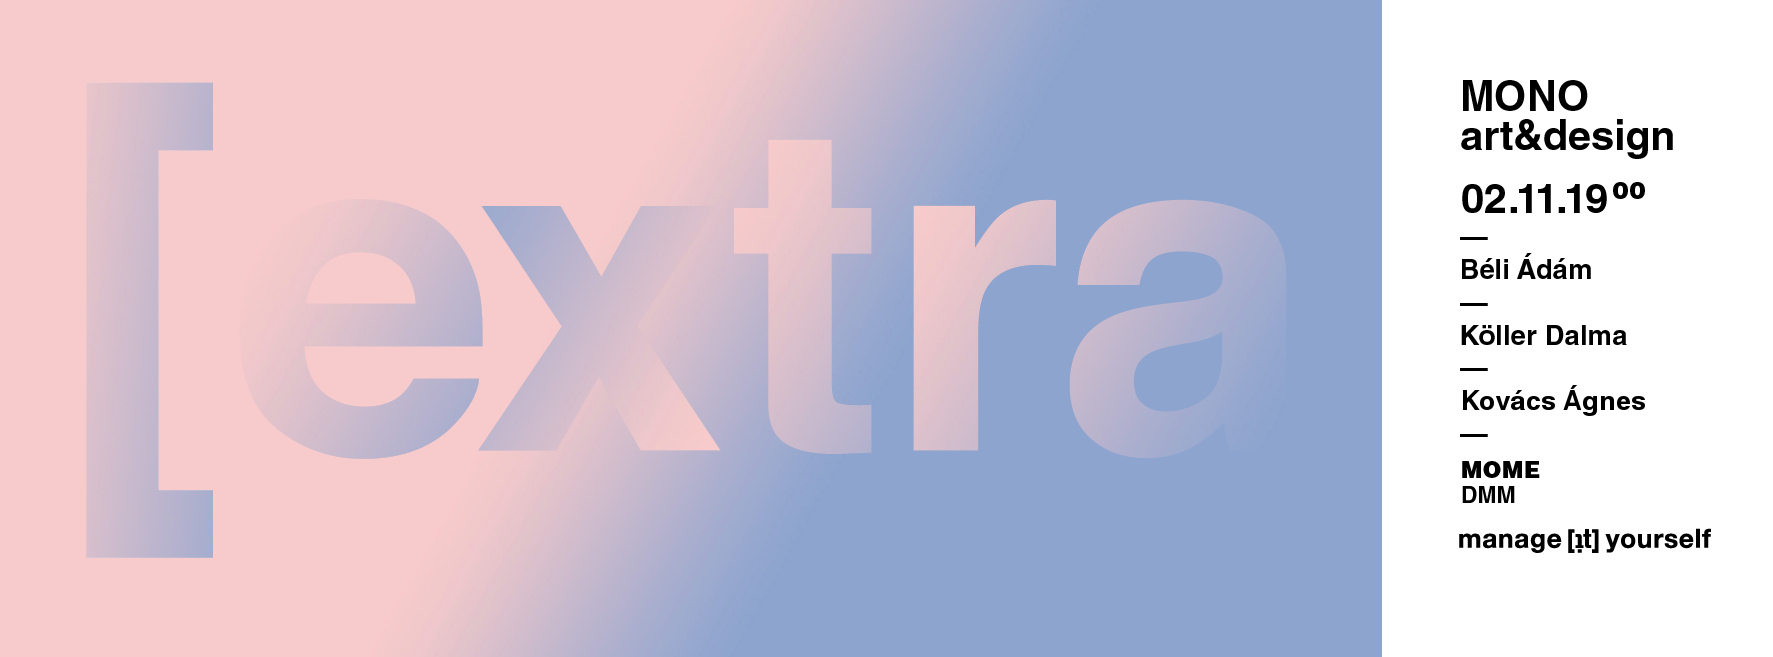 extra_cover